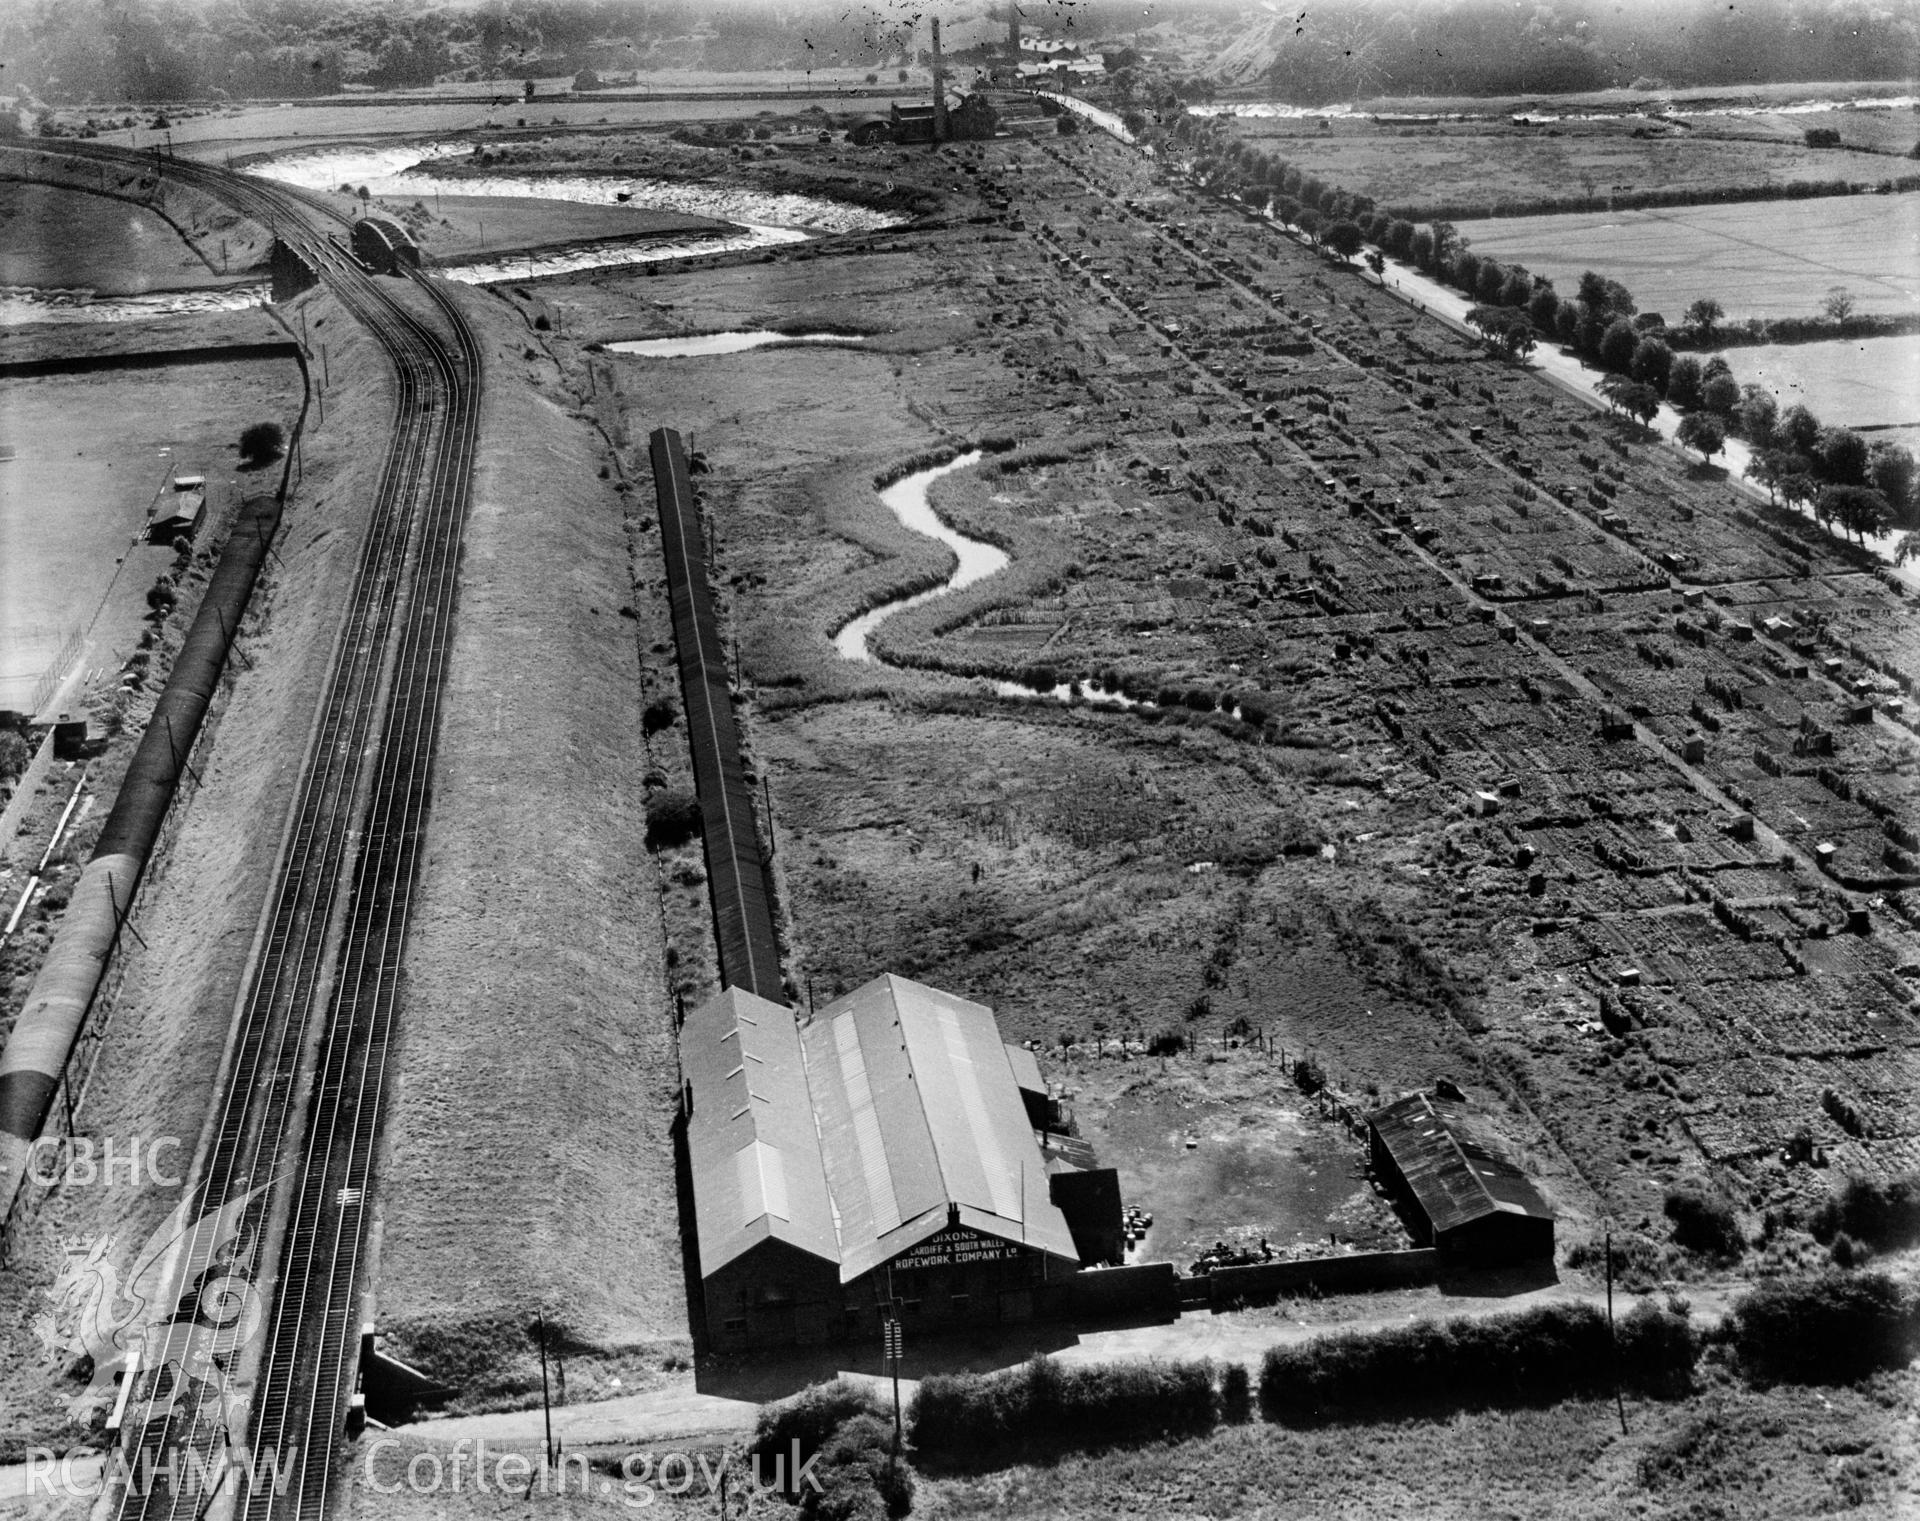 View of Dixon's Ropeworks, Grangetown, oblique aerial view. 5?x4? black and white glass plate negative.